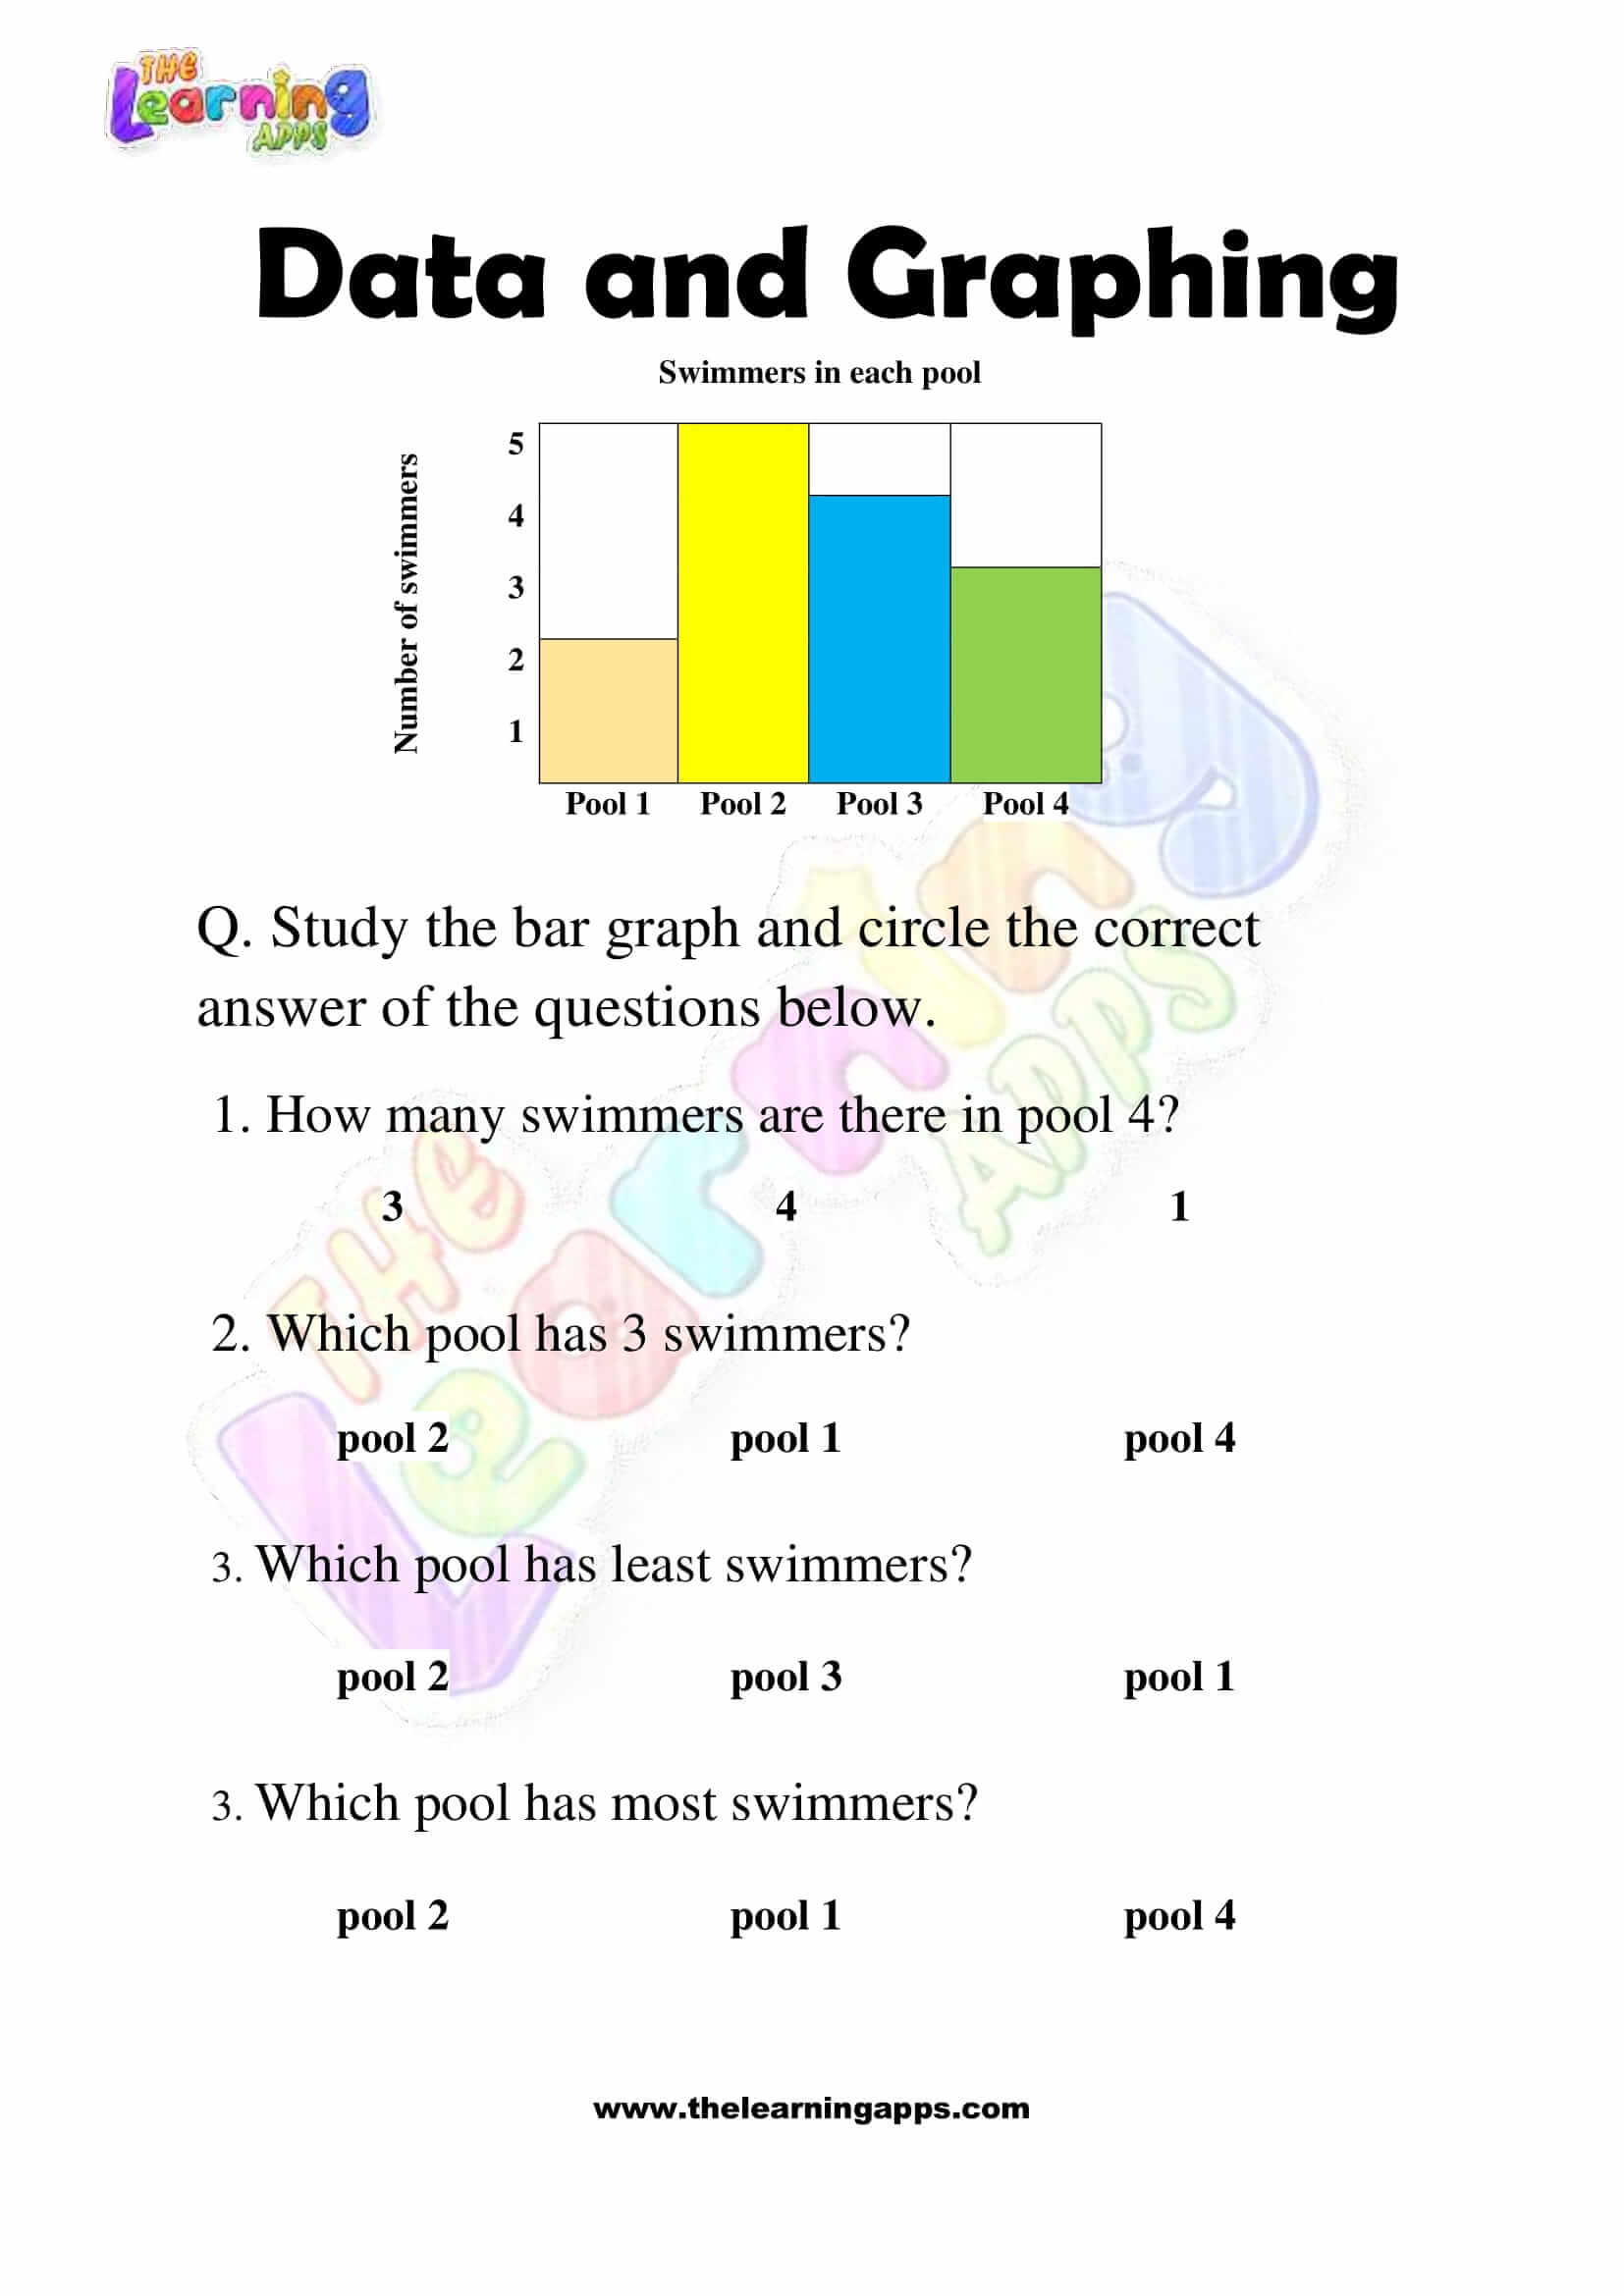 Data and Graphing - Grade 3 - Activity 3